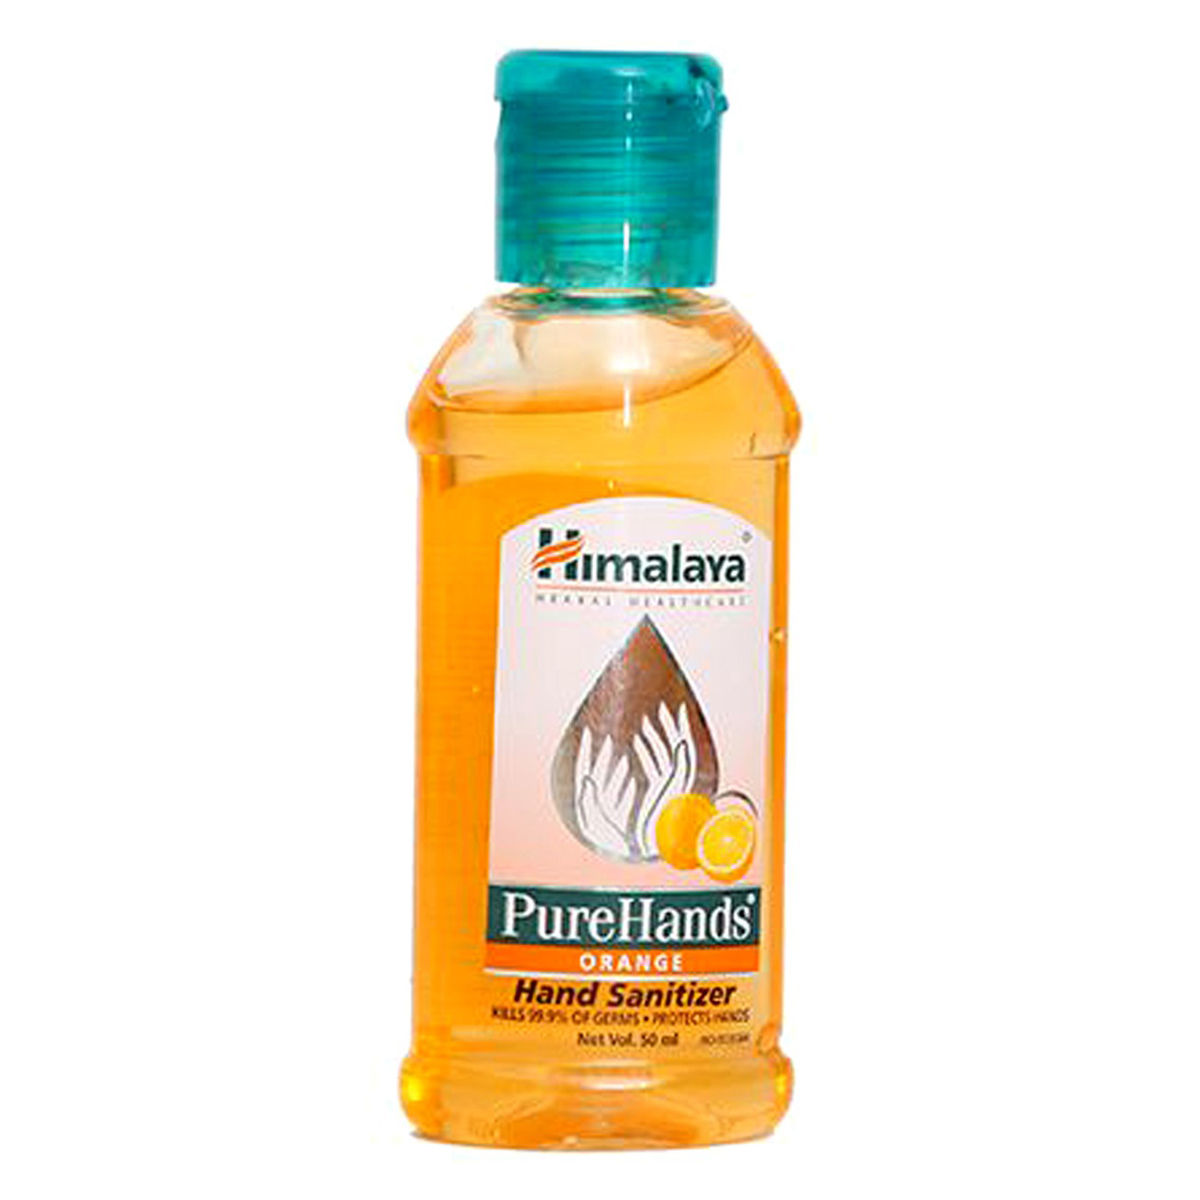 Himalaya Pure Hands Orange Flavour Hand Sanitizer, 50 ml, Pack of 1 